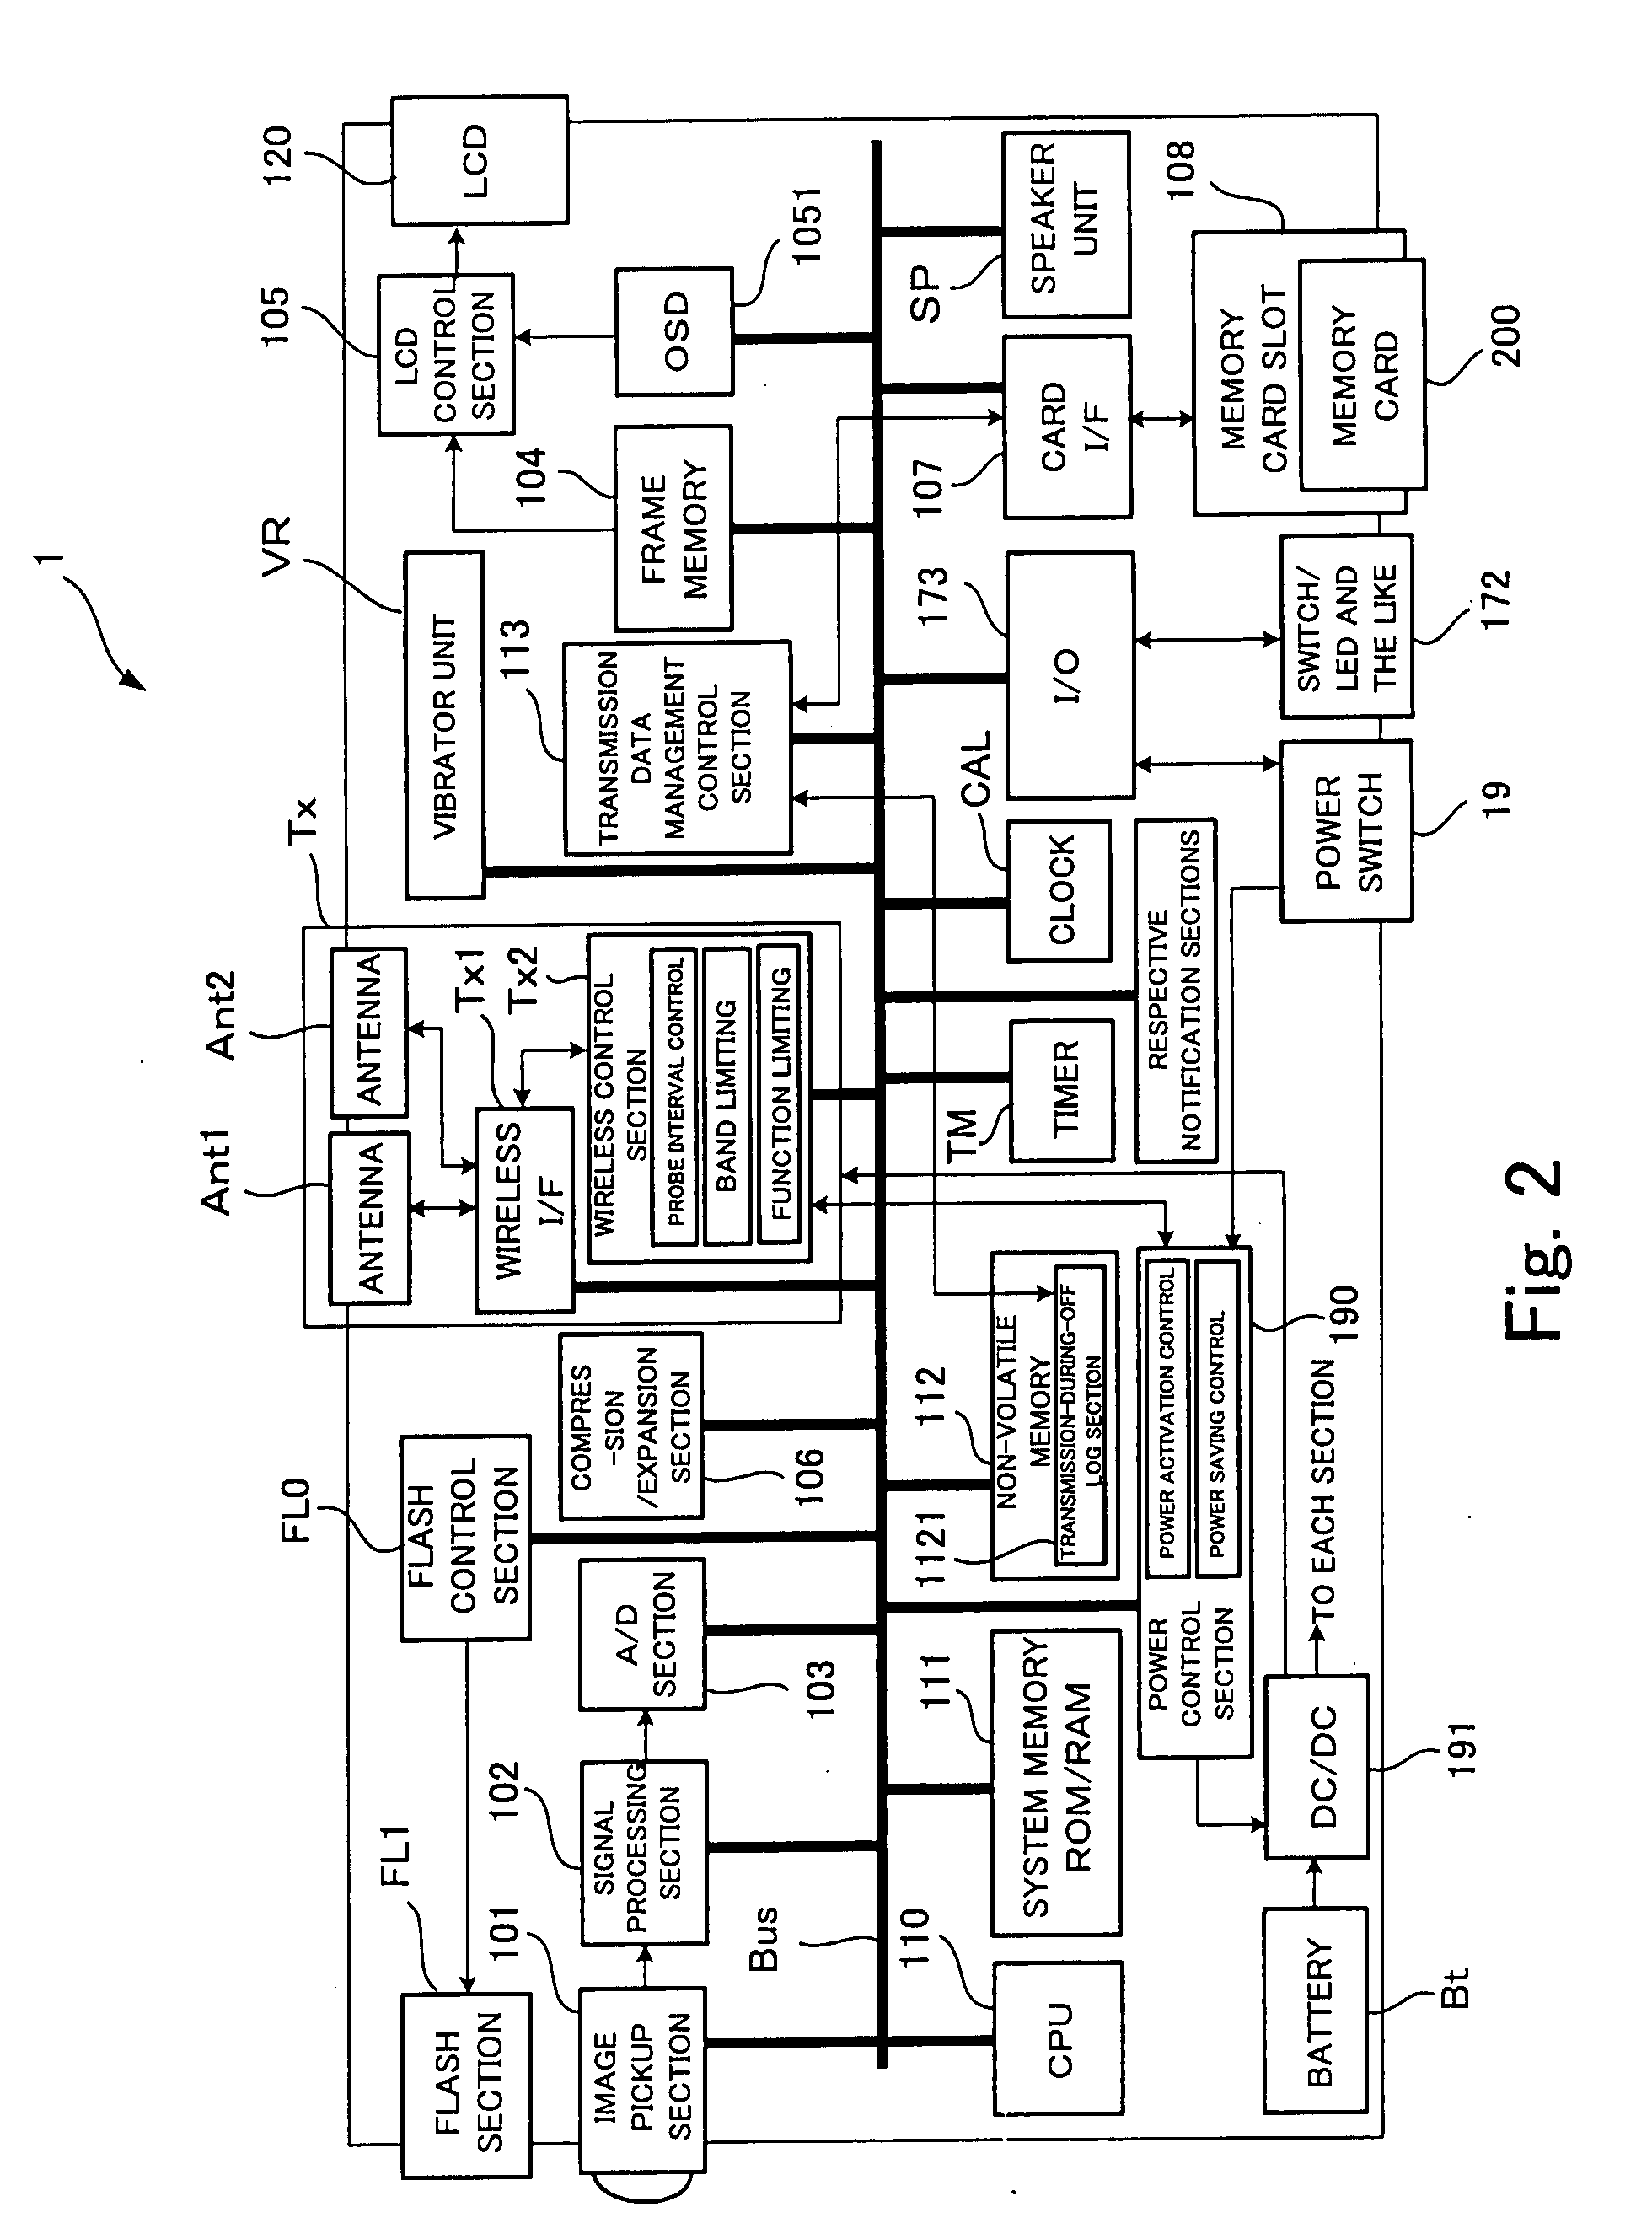 Mobile device and wireless communication apparatus